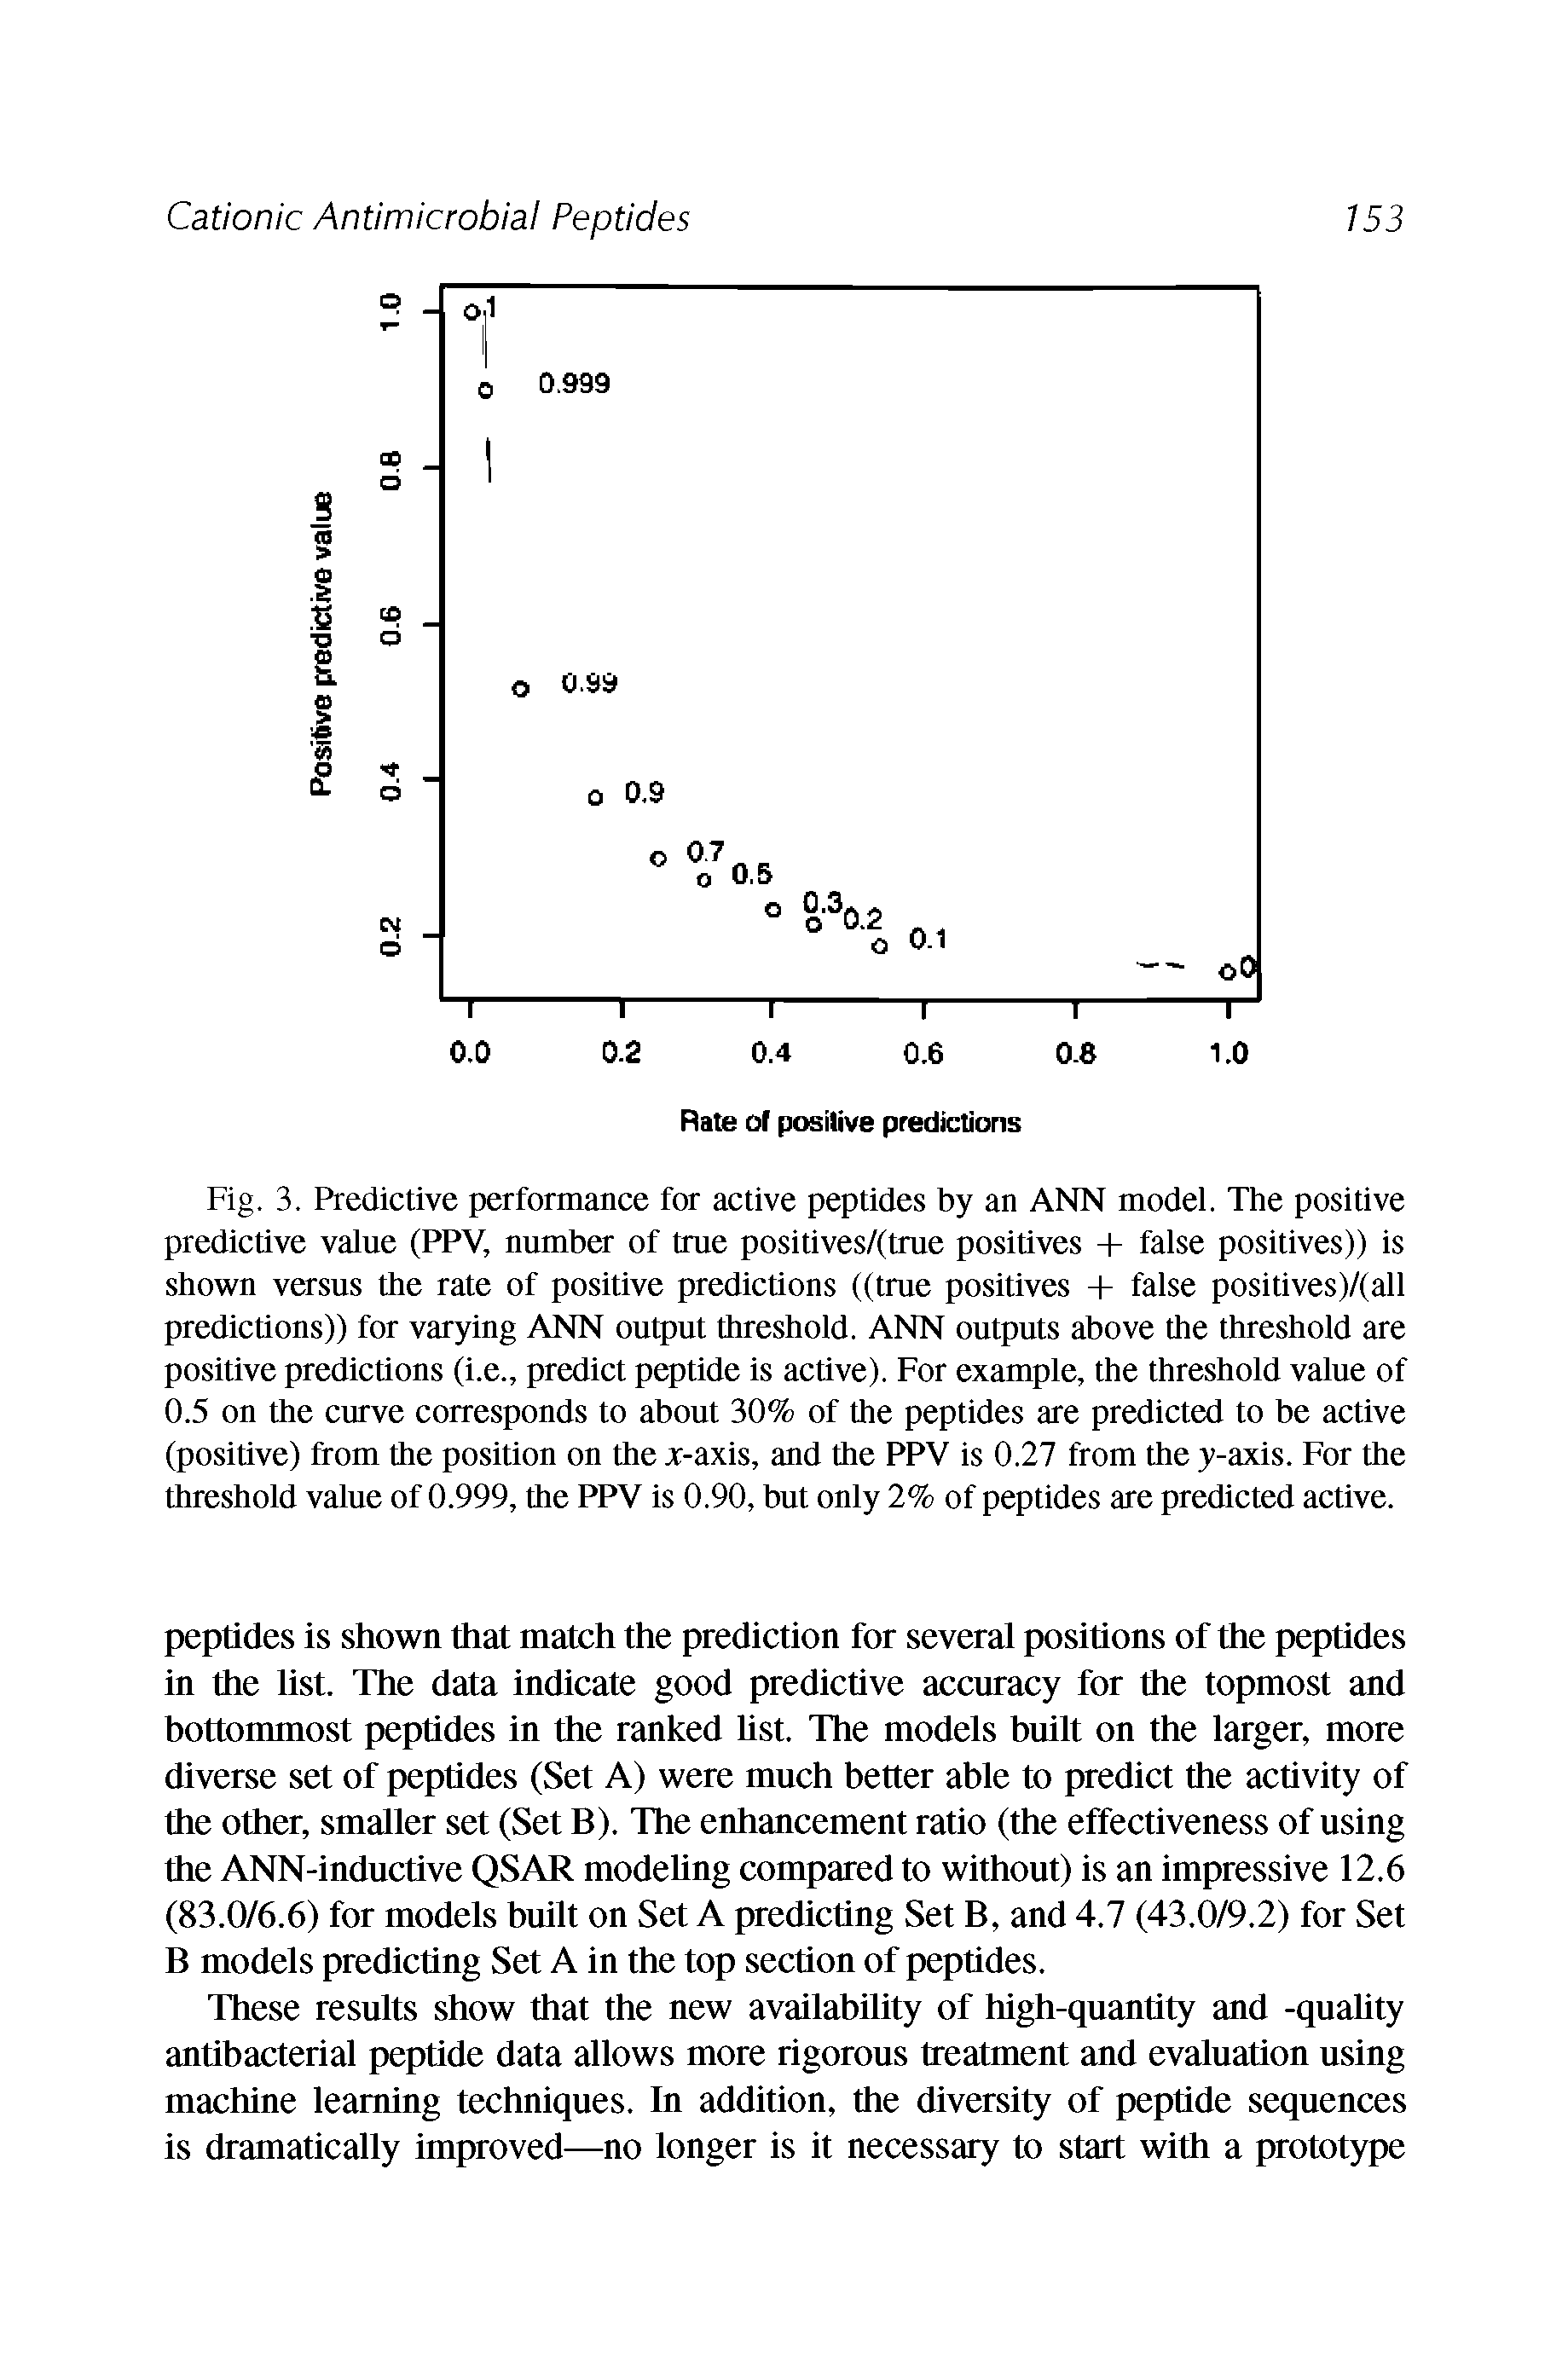 Fig. 3. Predictive performance for active peptides by an ANN model. The positive predictive value (PPV, number of true positives/(true positives + false positives)) is shown versus the rate of positive predictions ((true positives + false positives)/(all predictions)) for varying ANN output threshold. ANN outputs above the threshold are positive predictions (i.e., predict peptide is active). For example, the threshold value of 0.5 on the curve corresponds to about 30% of the peptides are predicted to be active (positive) from the position on the x-axis, and the PPV is 0.27 from the y-axis. For the threshold value of 0.999, the PPV is 0.90, but only 2% of peptides are predicted active.